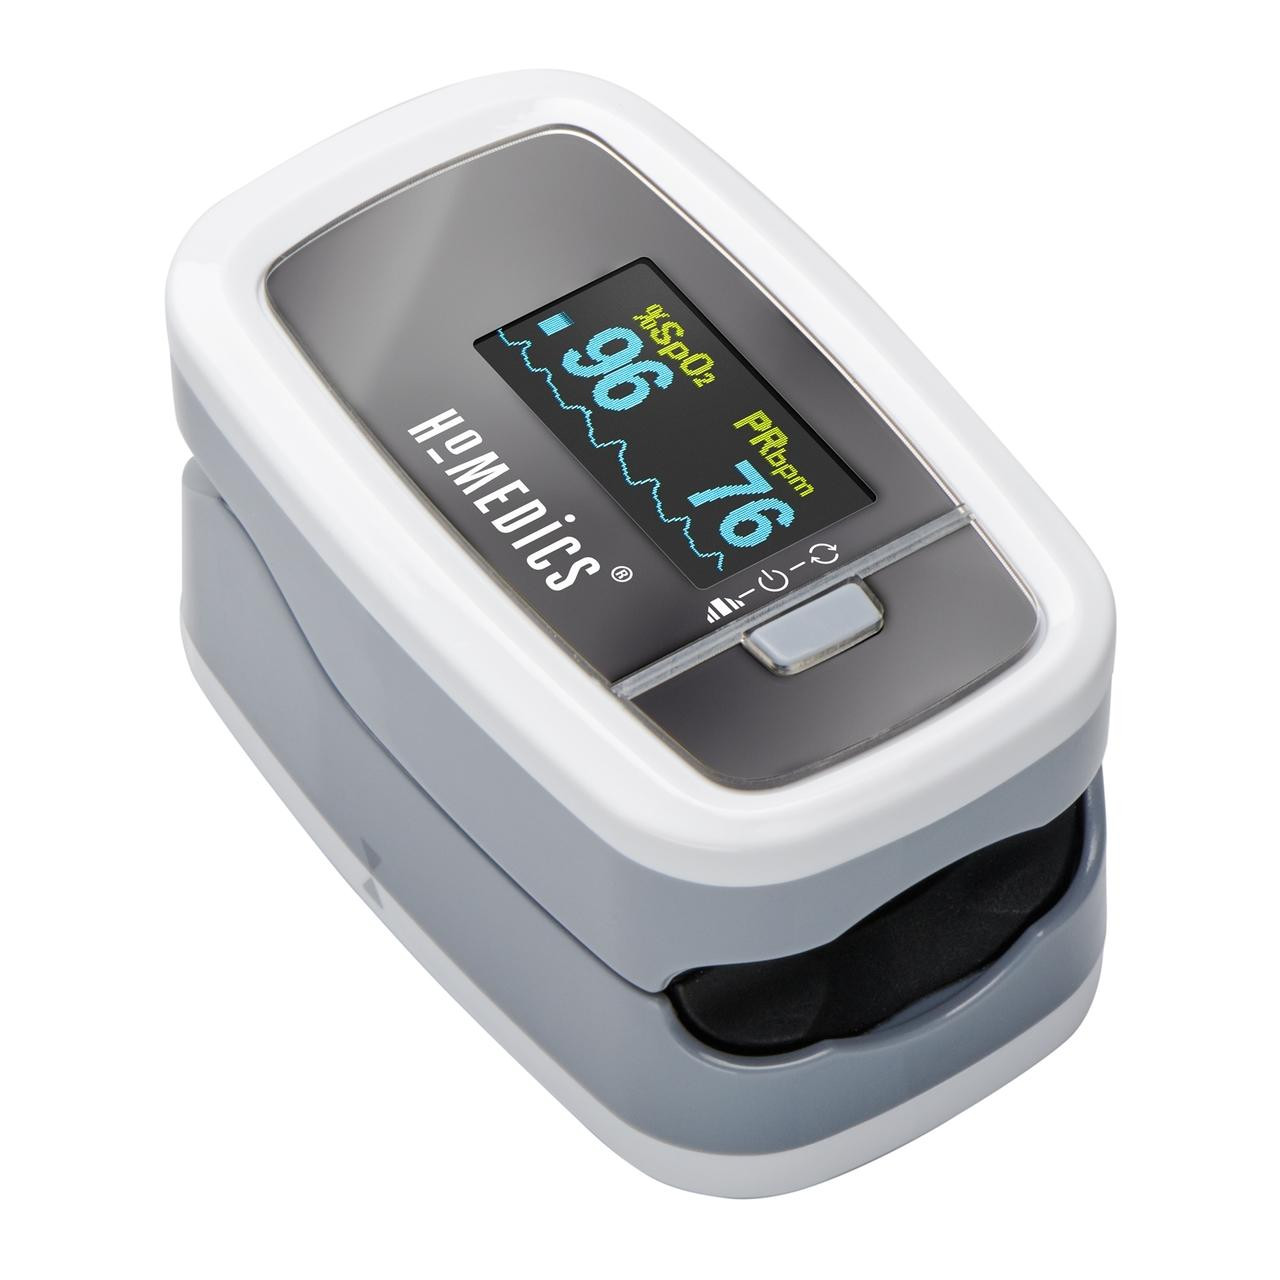 How to Use a Pulse Oximeter to Check Oxygen Saturation Levels